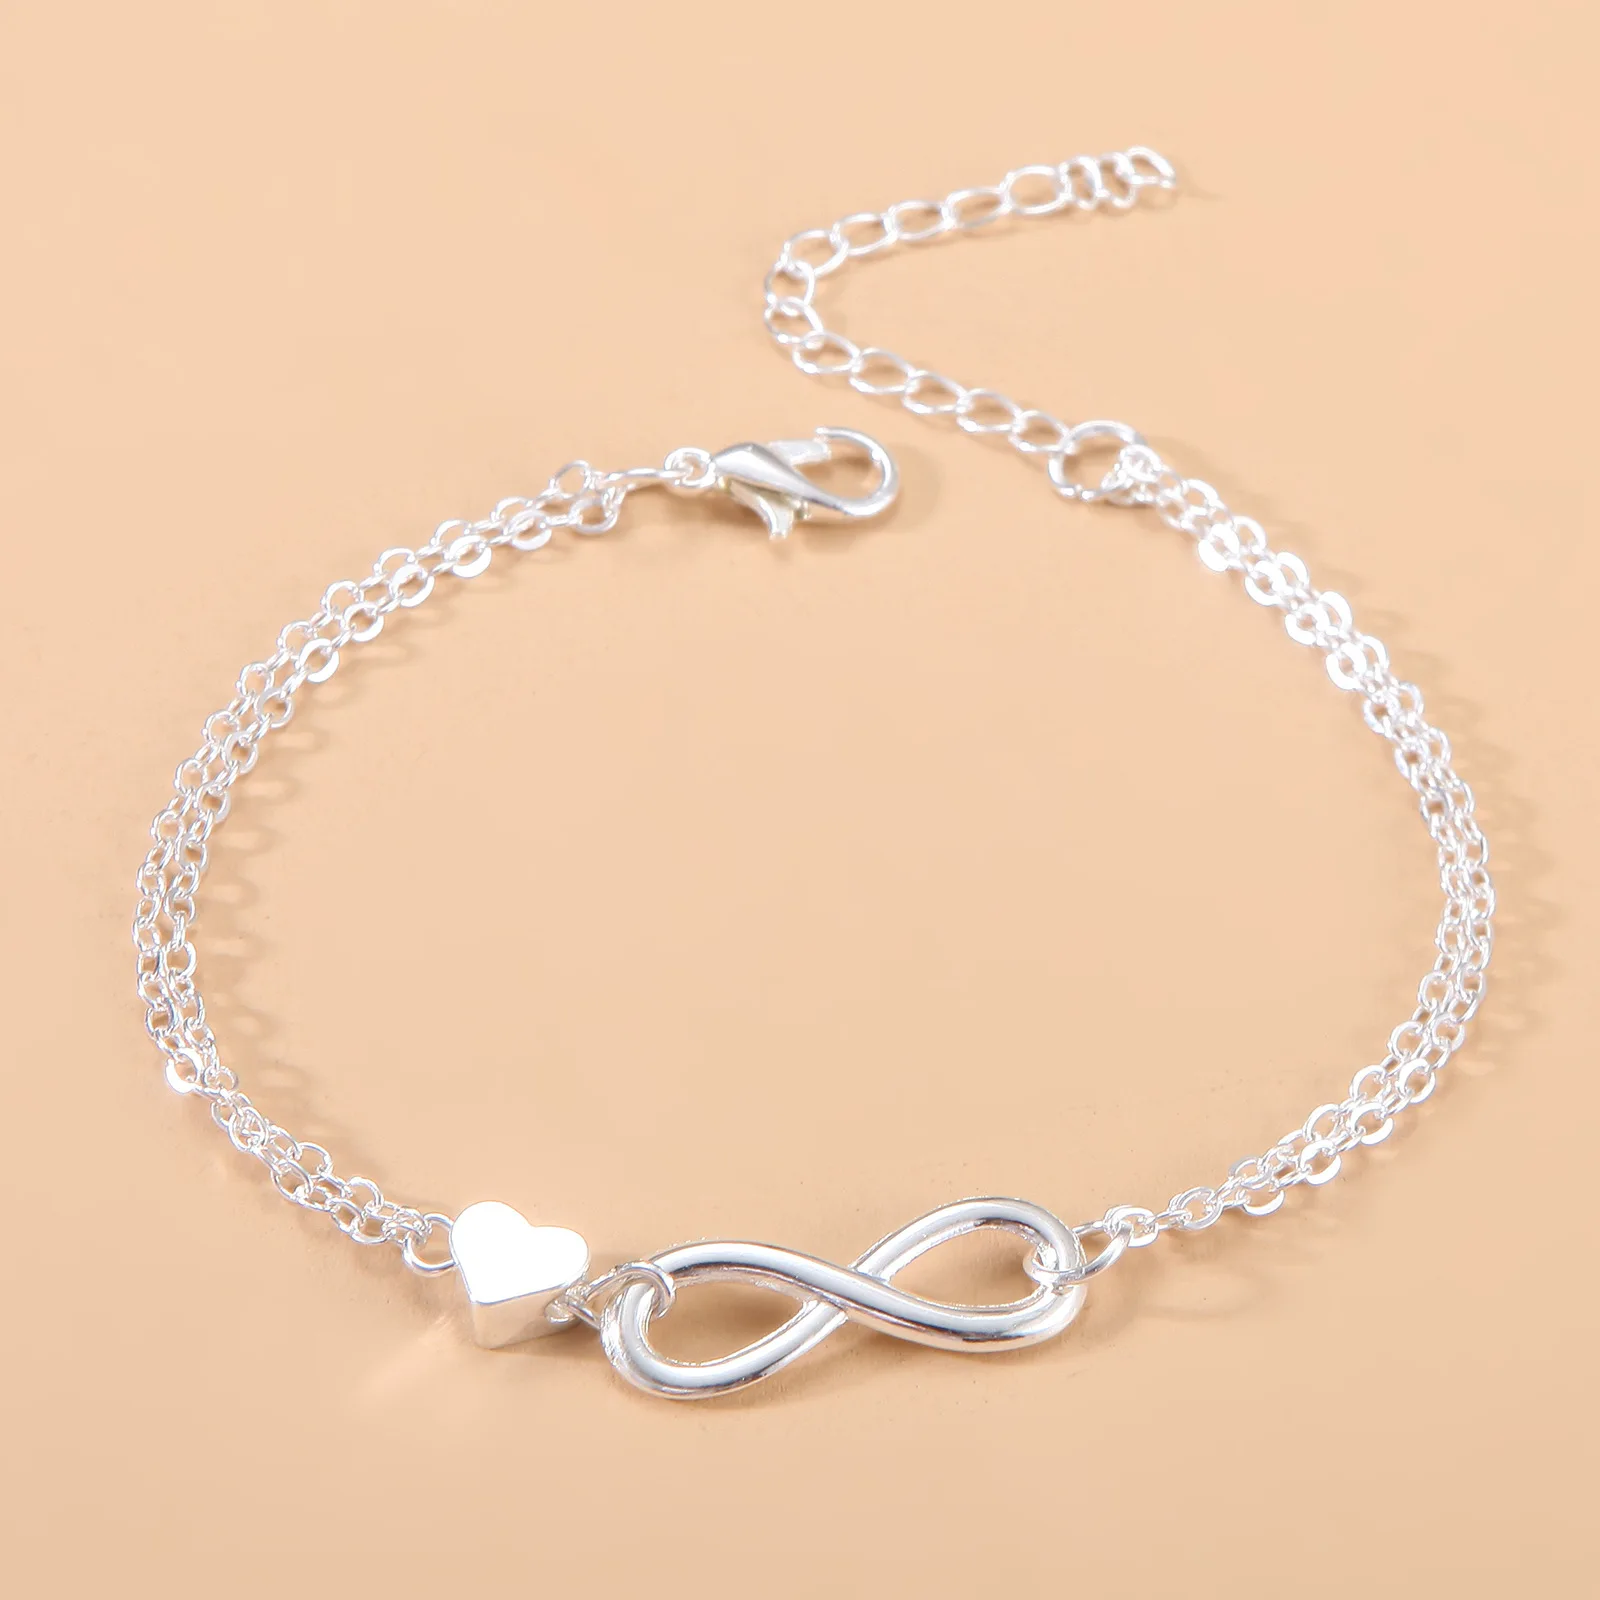 

Rhinestone Infinity Bracelet 8 Number Pendant Charm Bangle Couple Fashion Jewelry for Women Men Lover Friend Lover Gifts